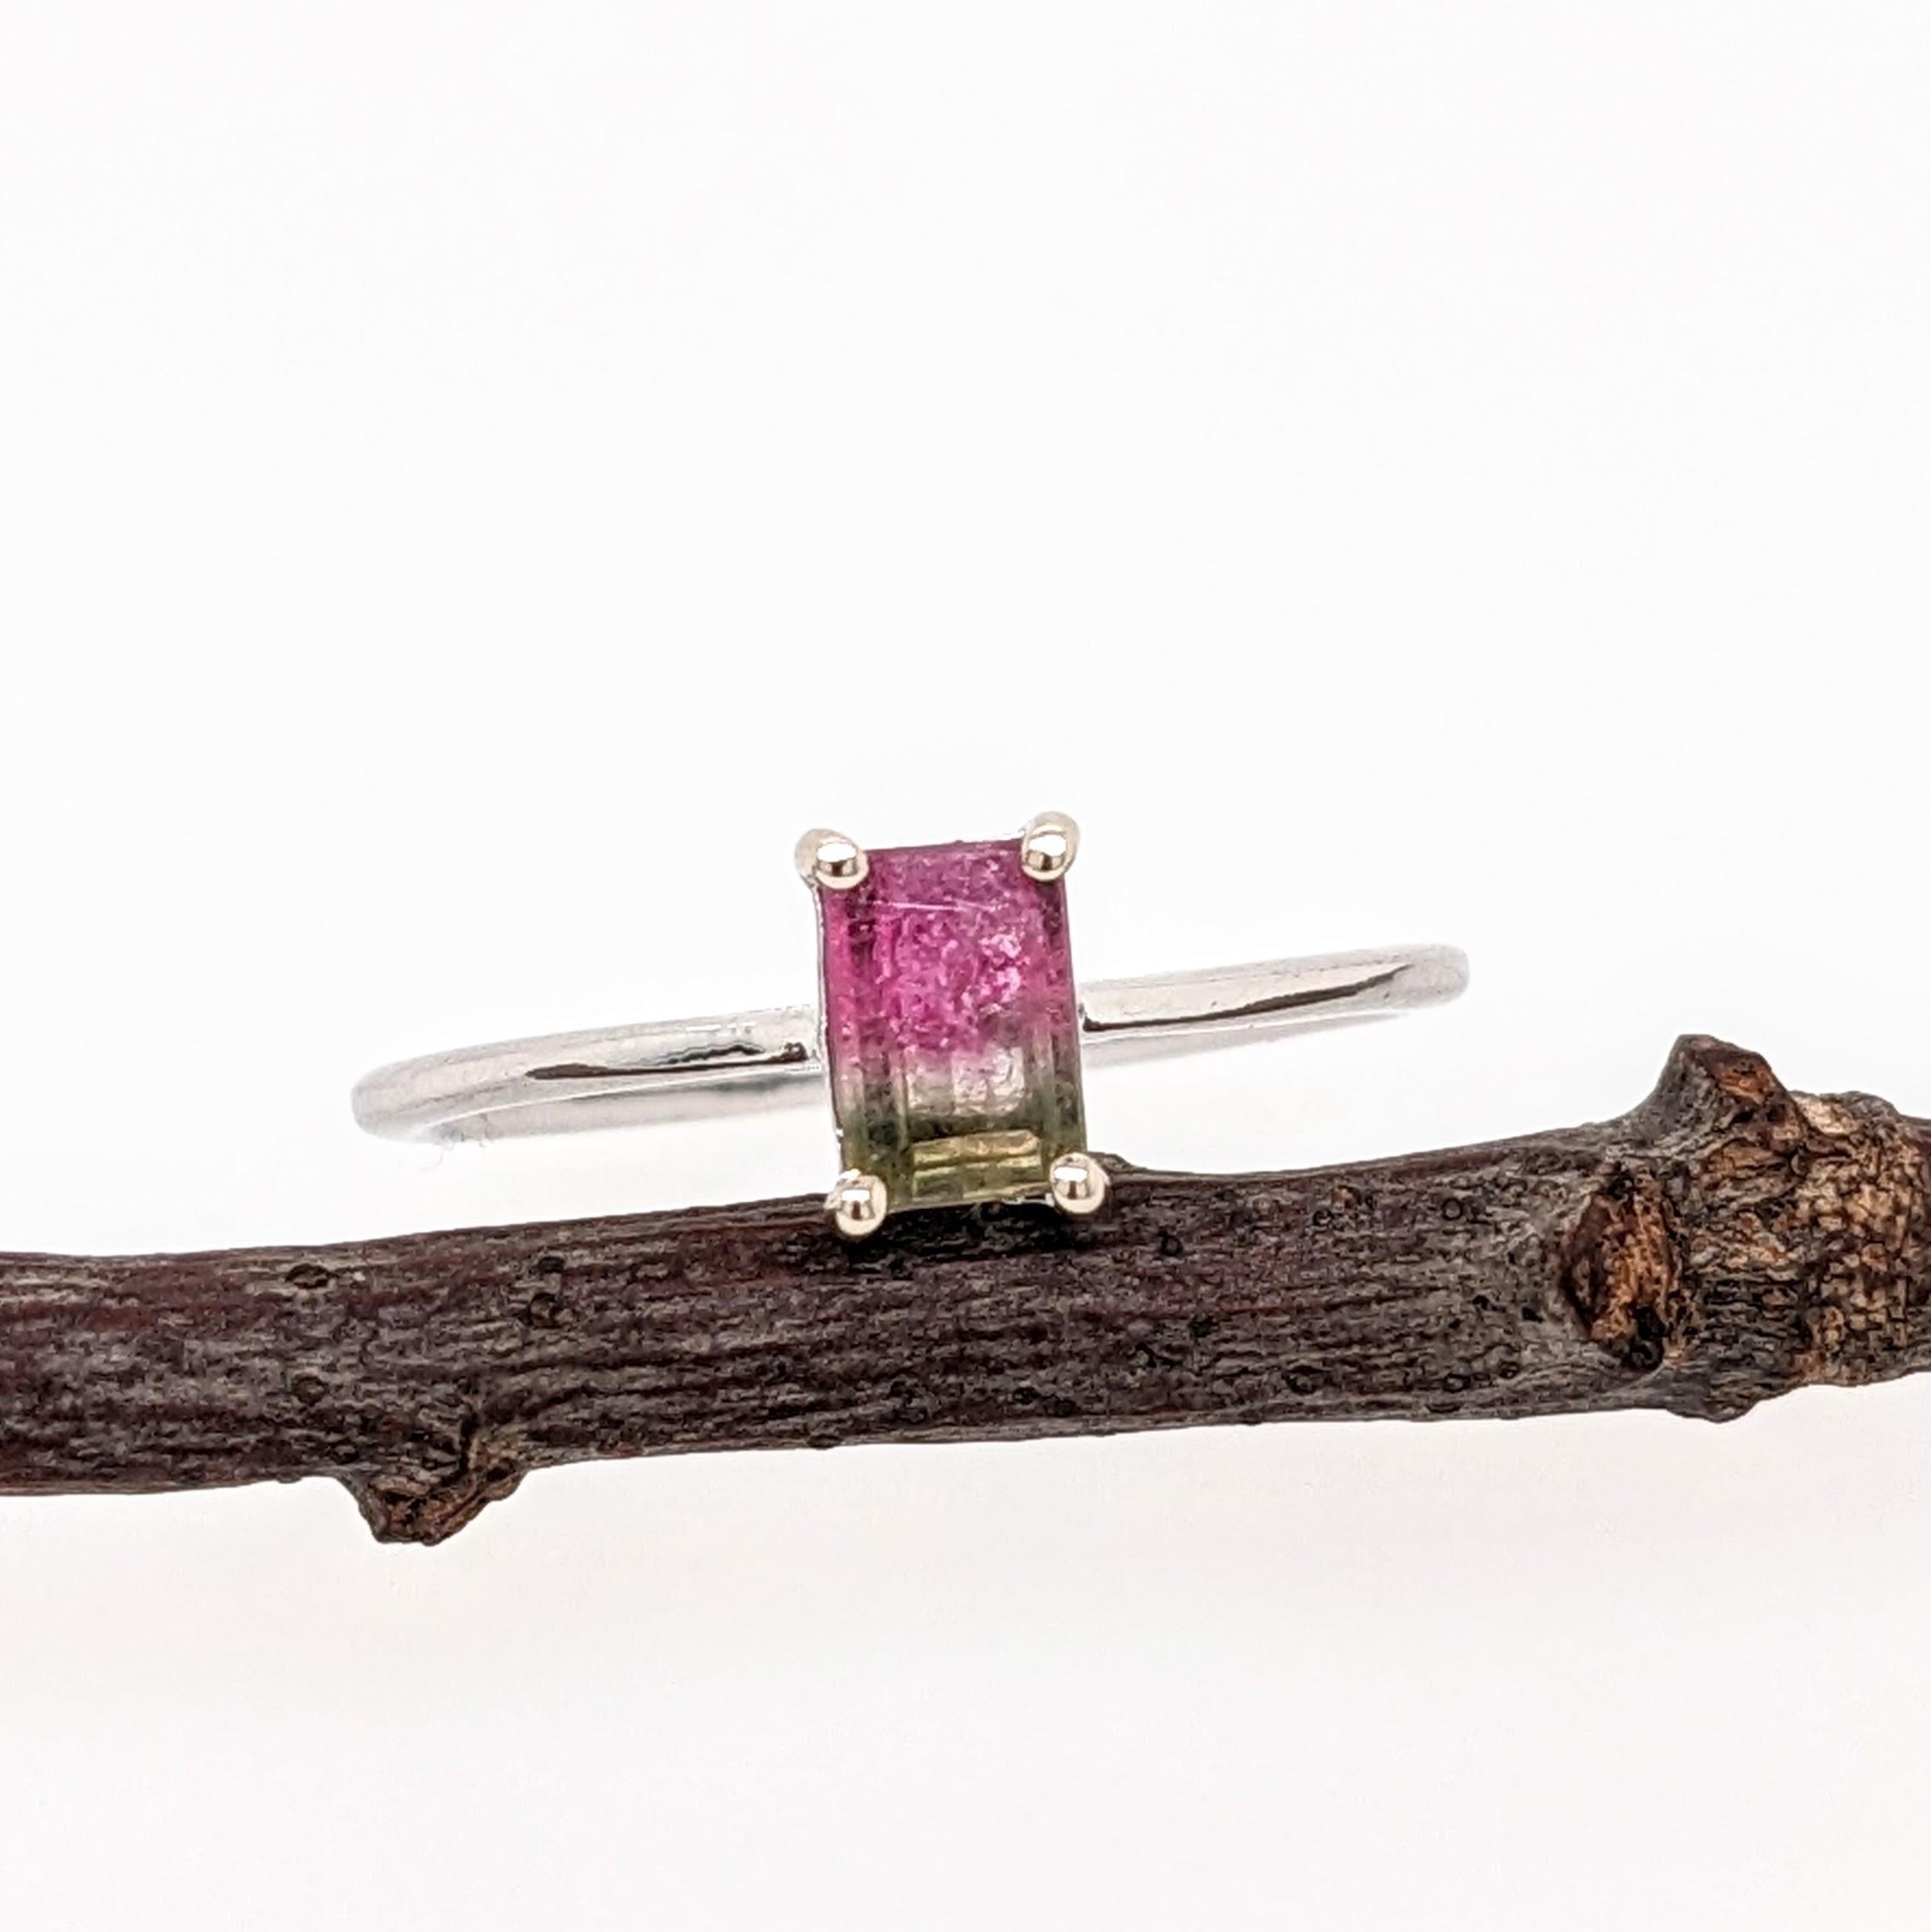 This ring features a beautiful watermelon tourmaline in a classic NNJ Designs ring setting in 14k white gold. A gorgeous modern look that's perfectly balanced between minimalist and glamour. This solitaire ring also makes a beautiful October